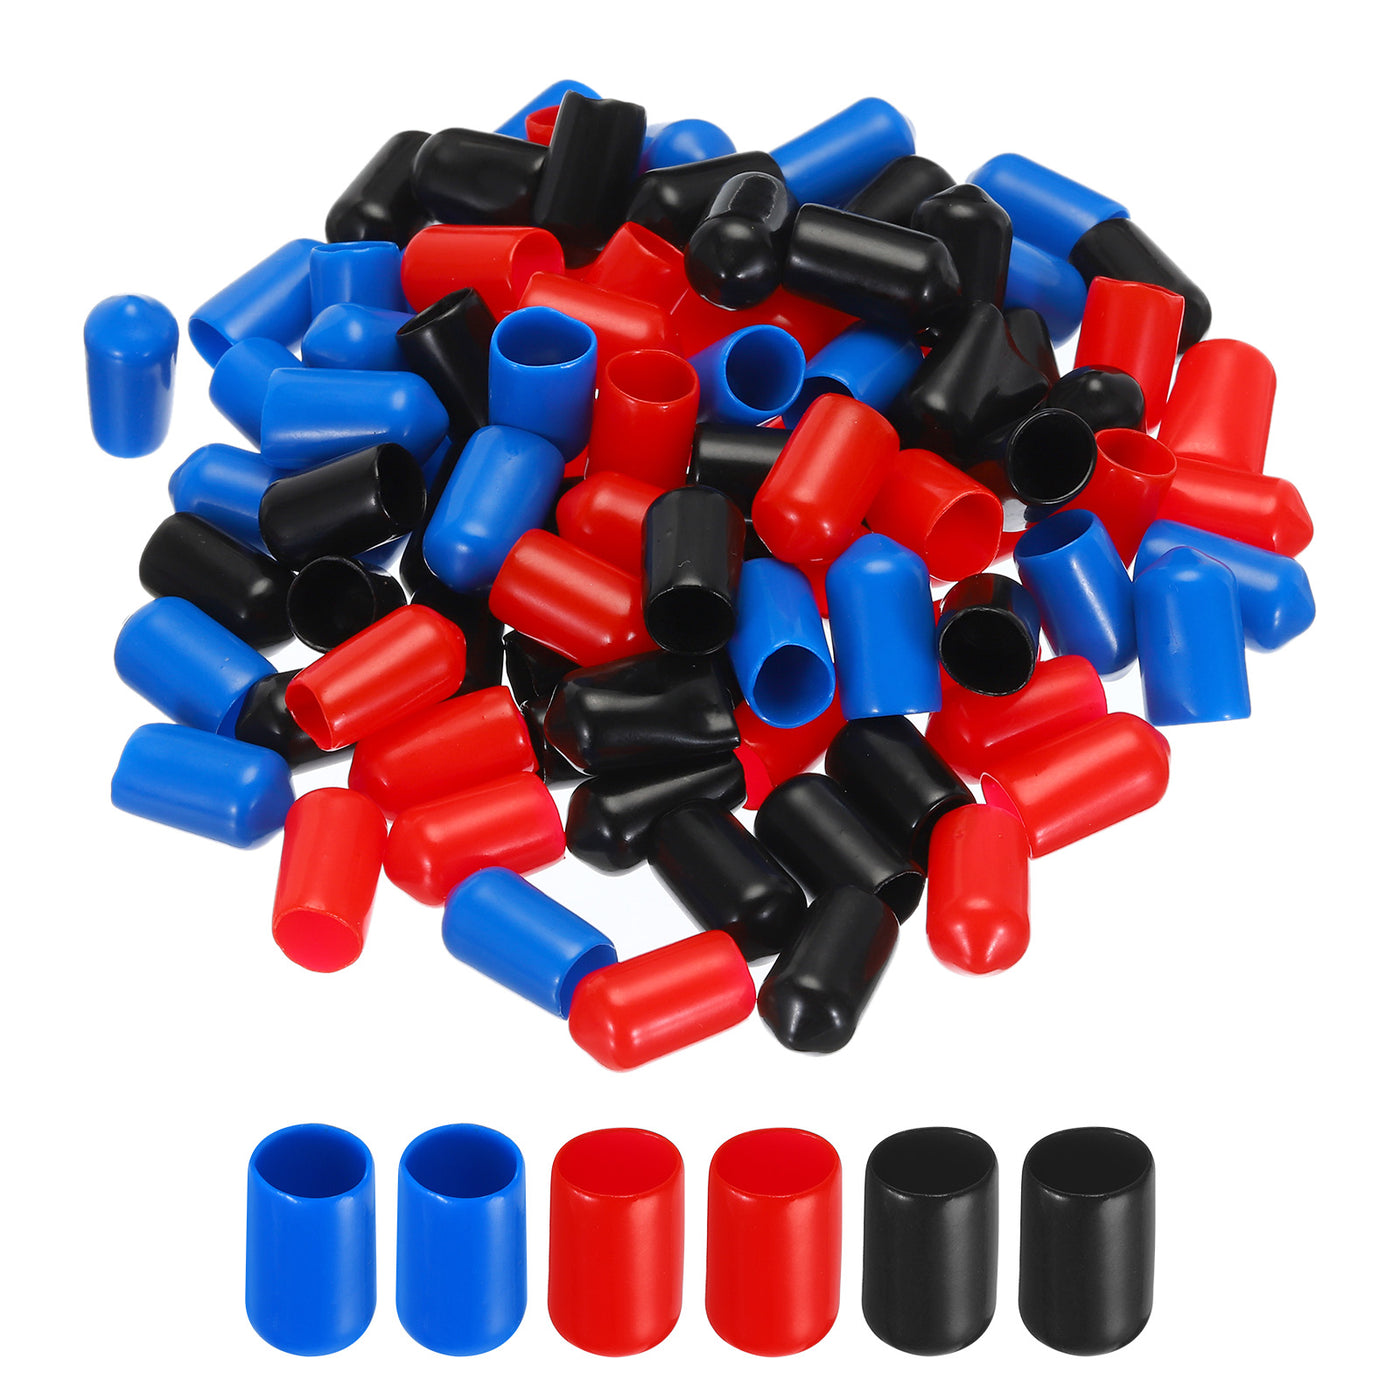 uxcell Uxcell 90pcs Rubber End Caps 9.5mm(3/8") ID Vinyl PVC Round Tube Bolt Cap Cover Screw Thread Protectors, Black Red Blue